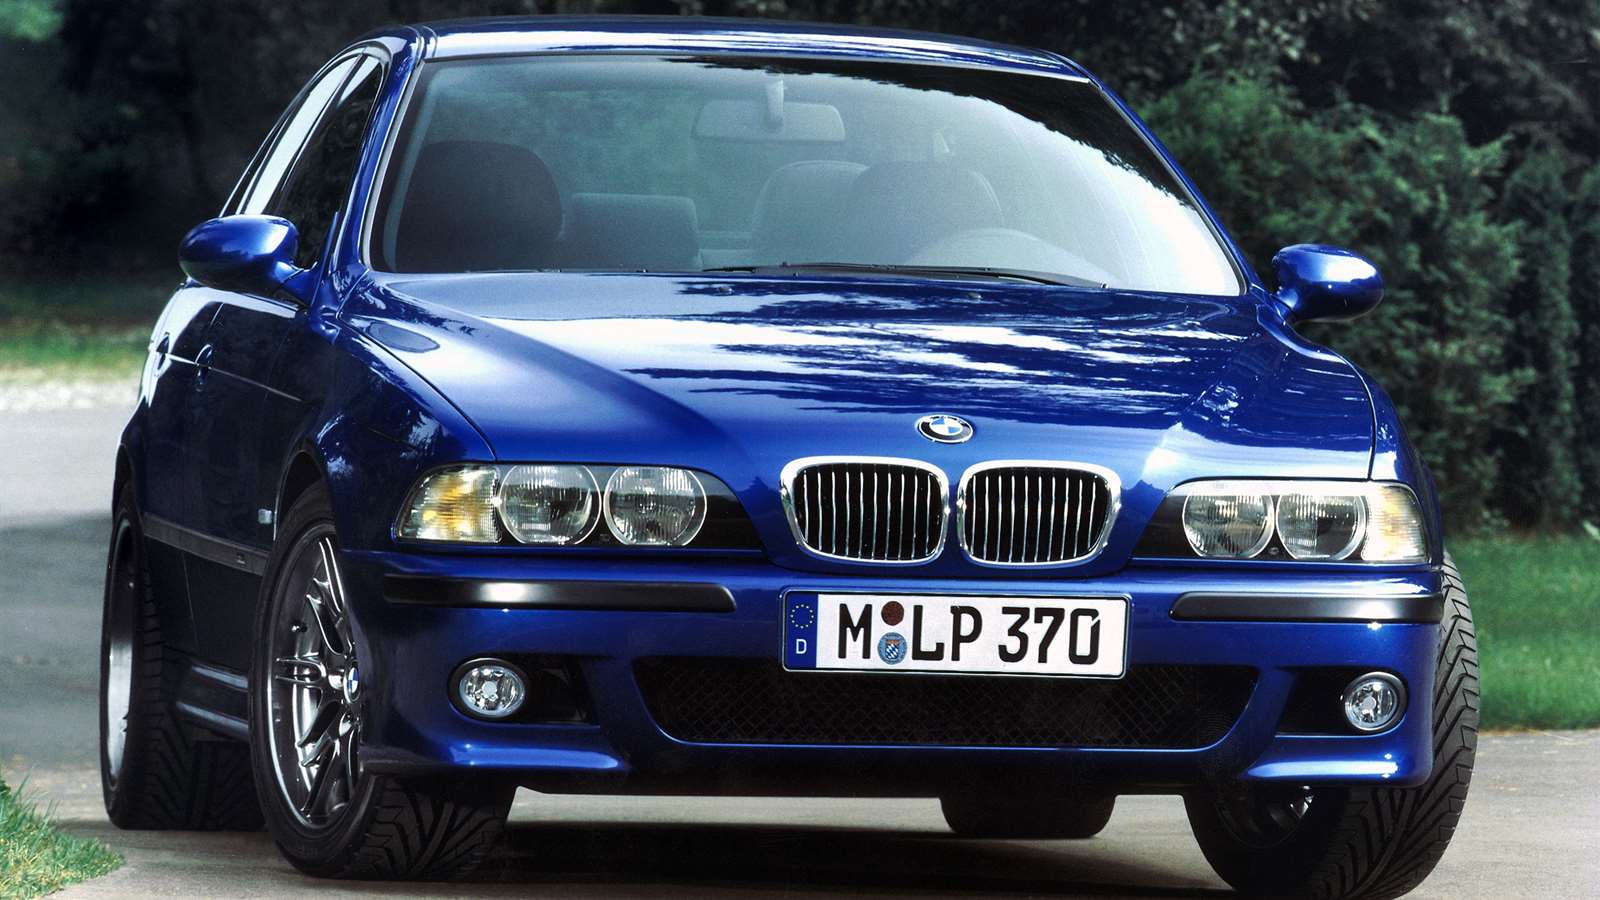 2003 BMW M5 Review: Worth Splurging On Before It's Too Late